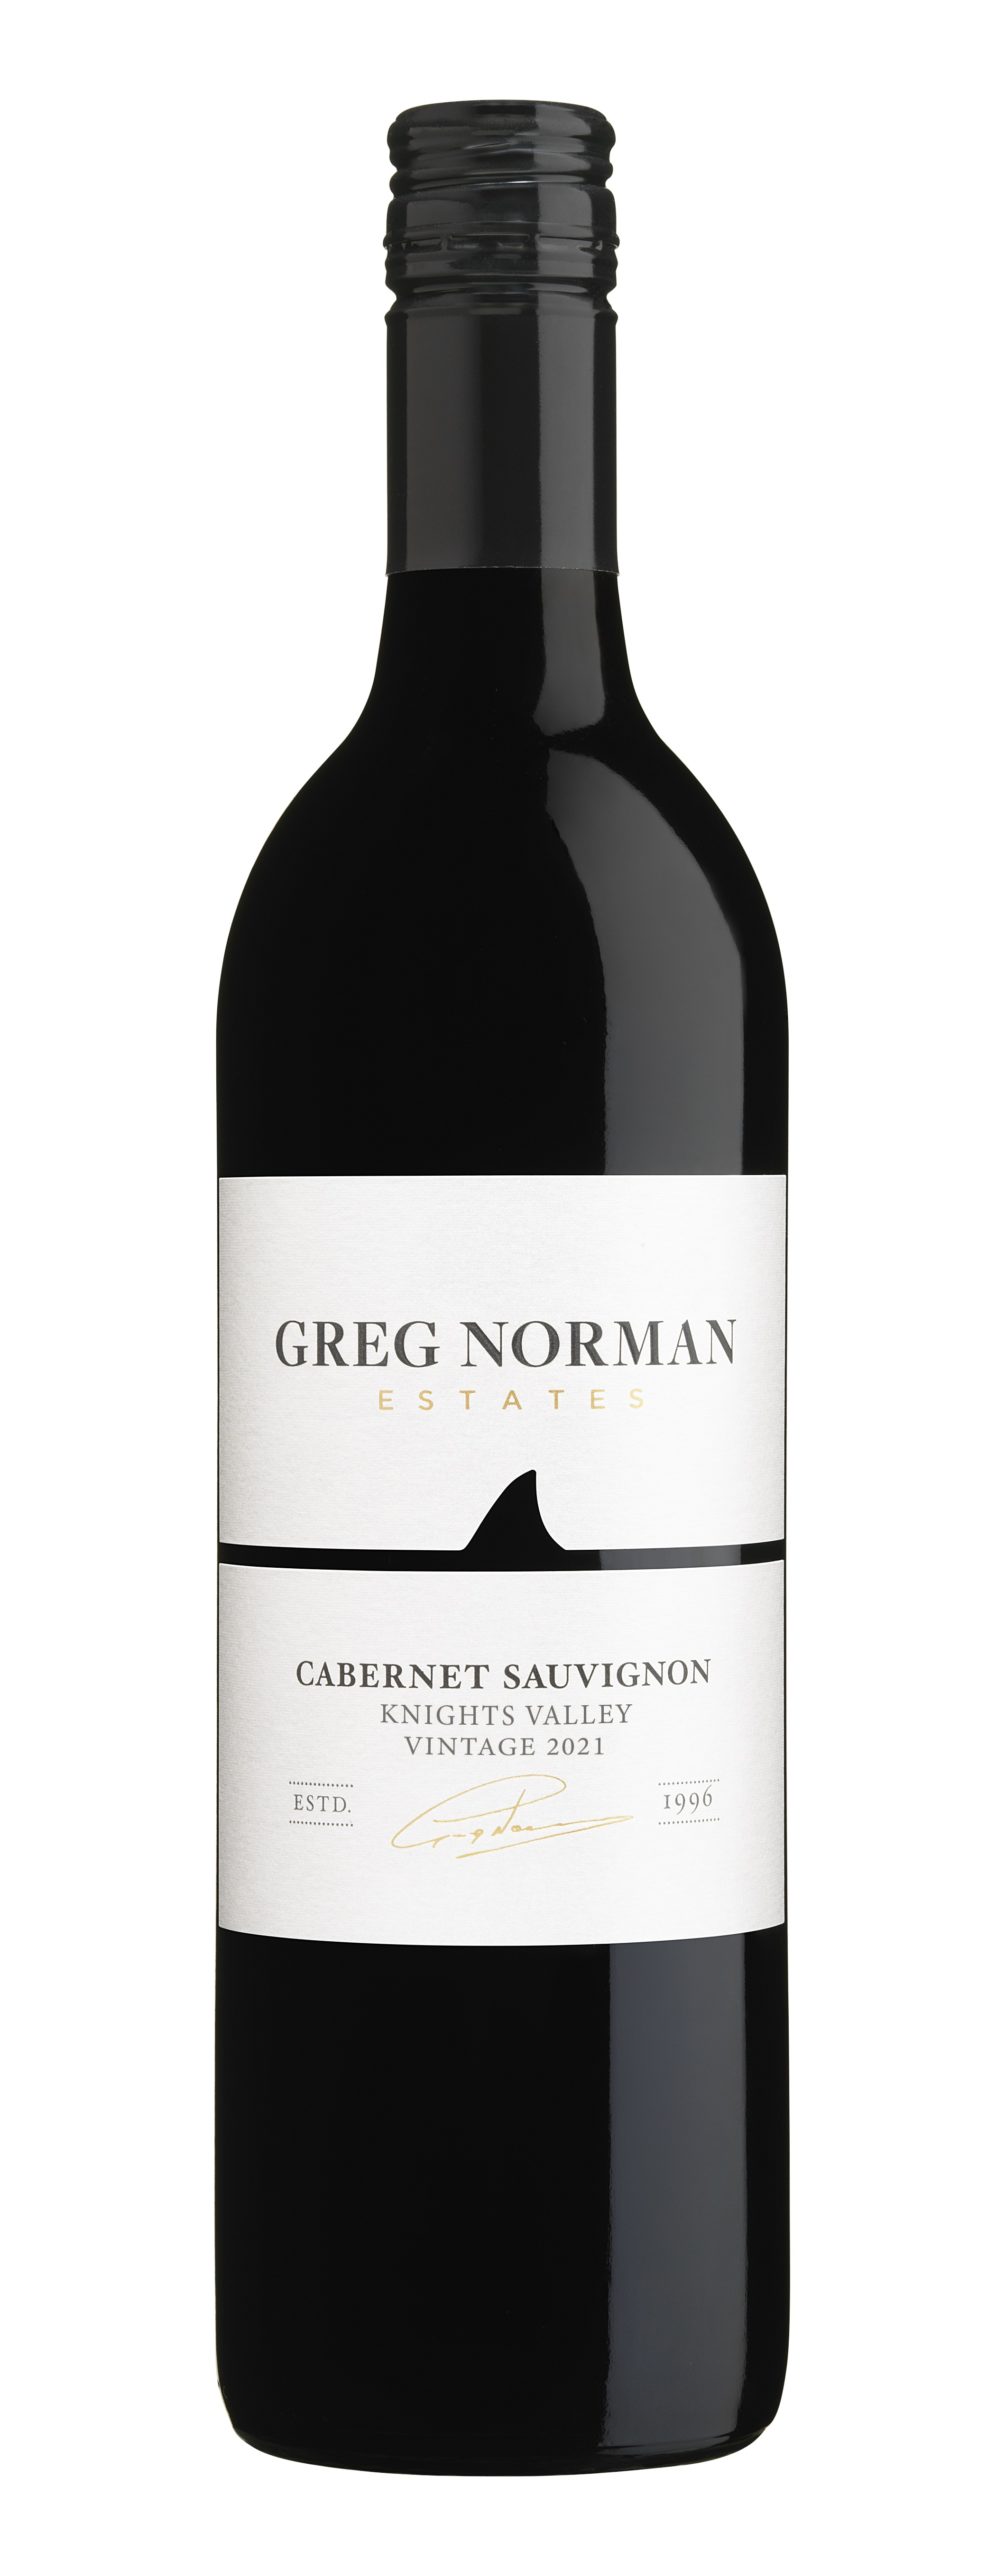 red wine bottle with white label reads Greg Norman Estates